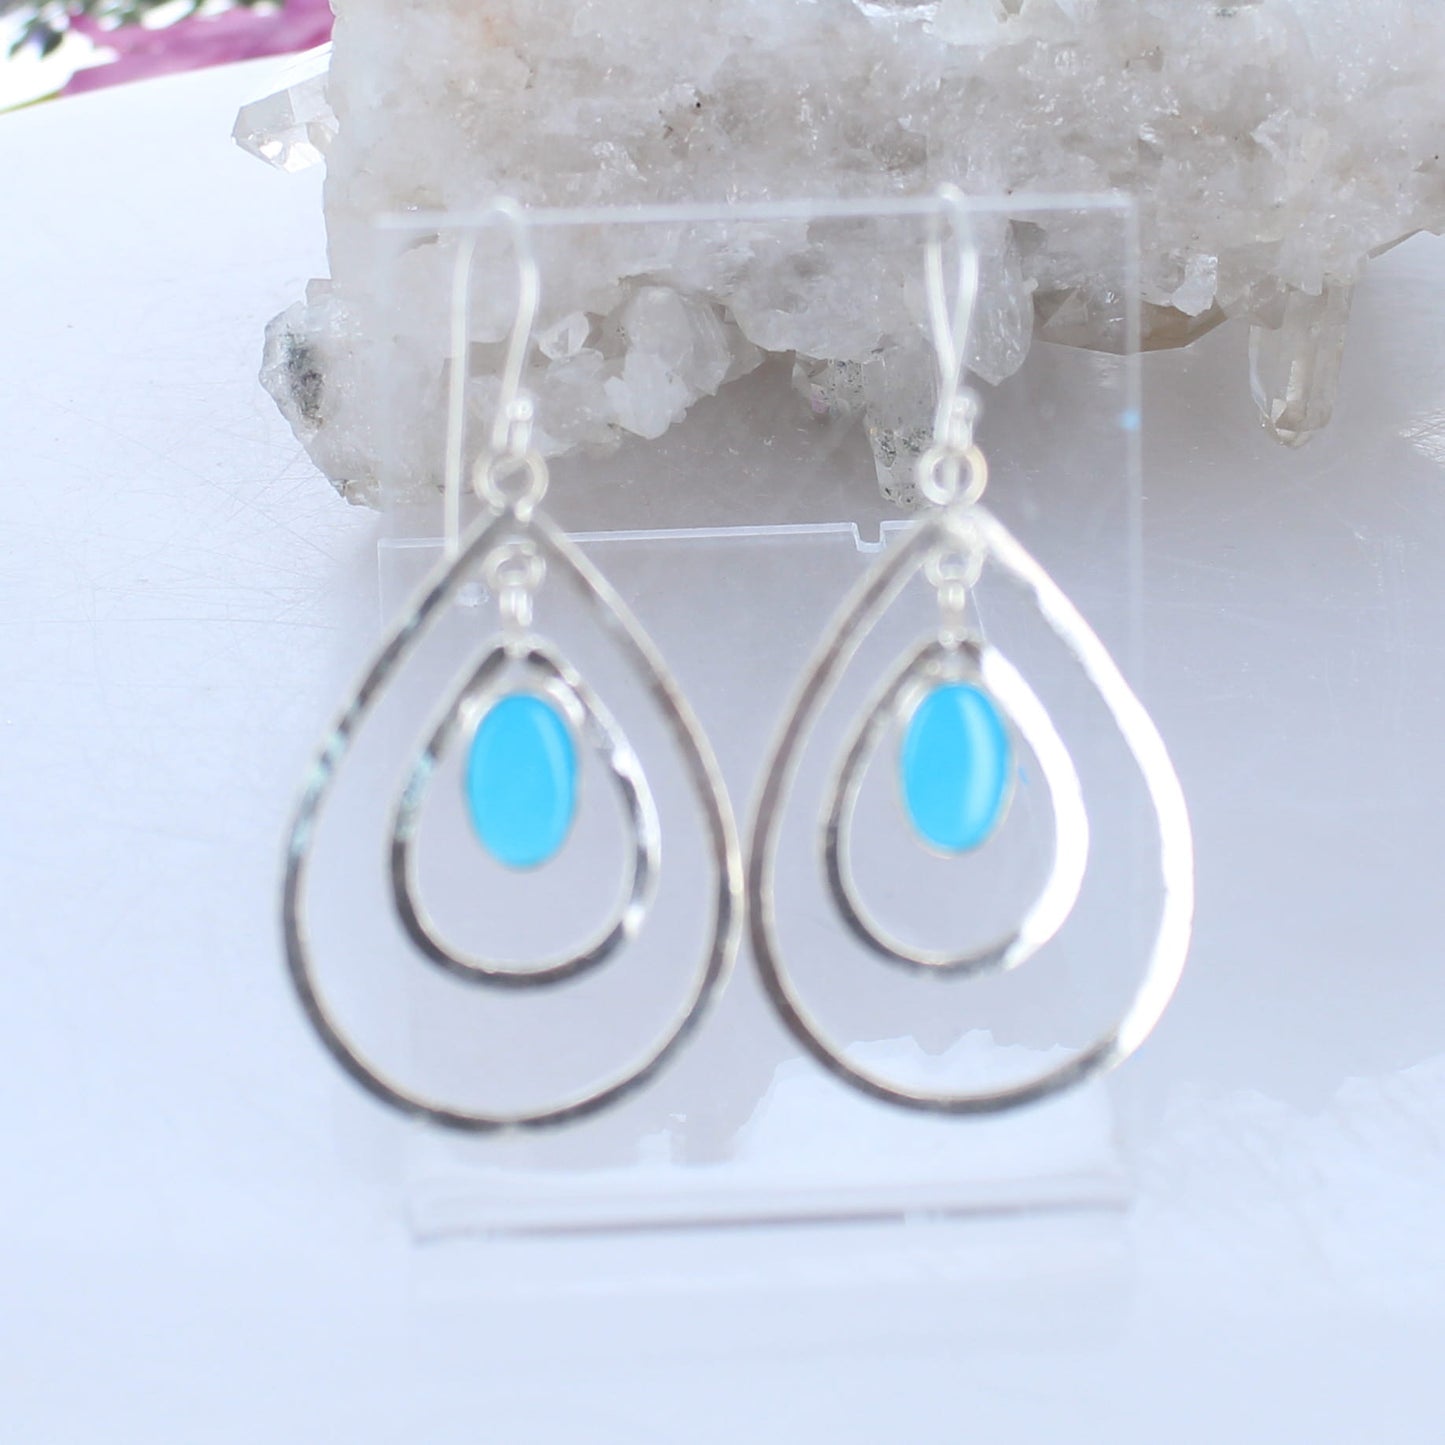 Bright Blue Sonoran Oval Turquoise Earrings Double Hoops Sterling